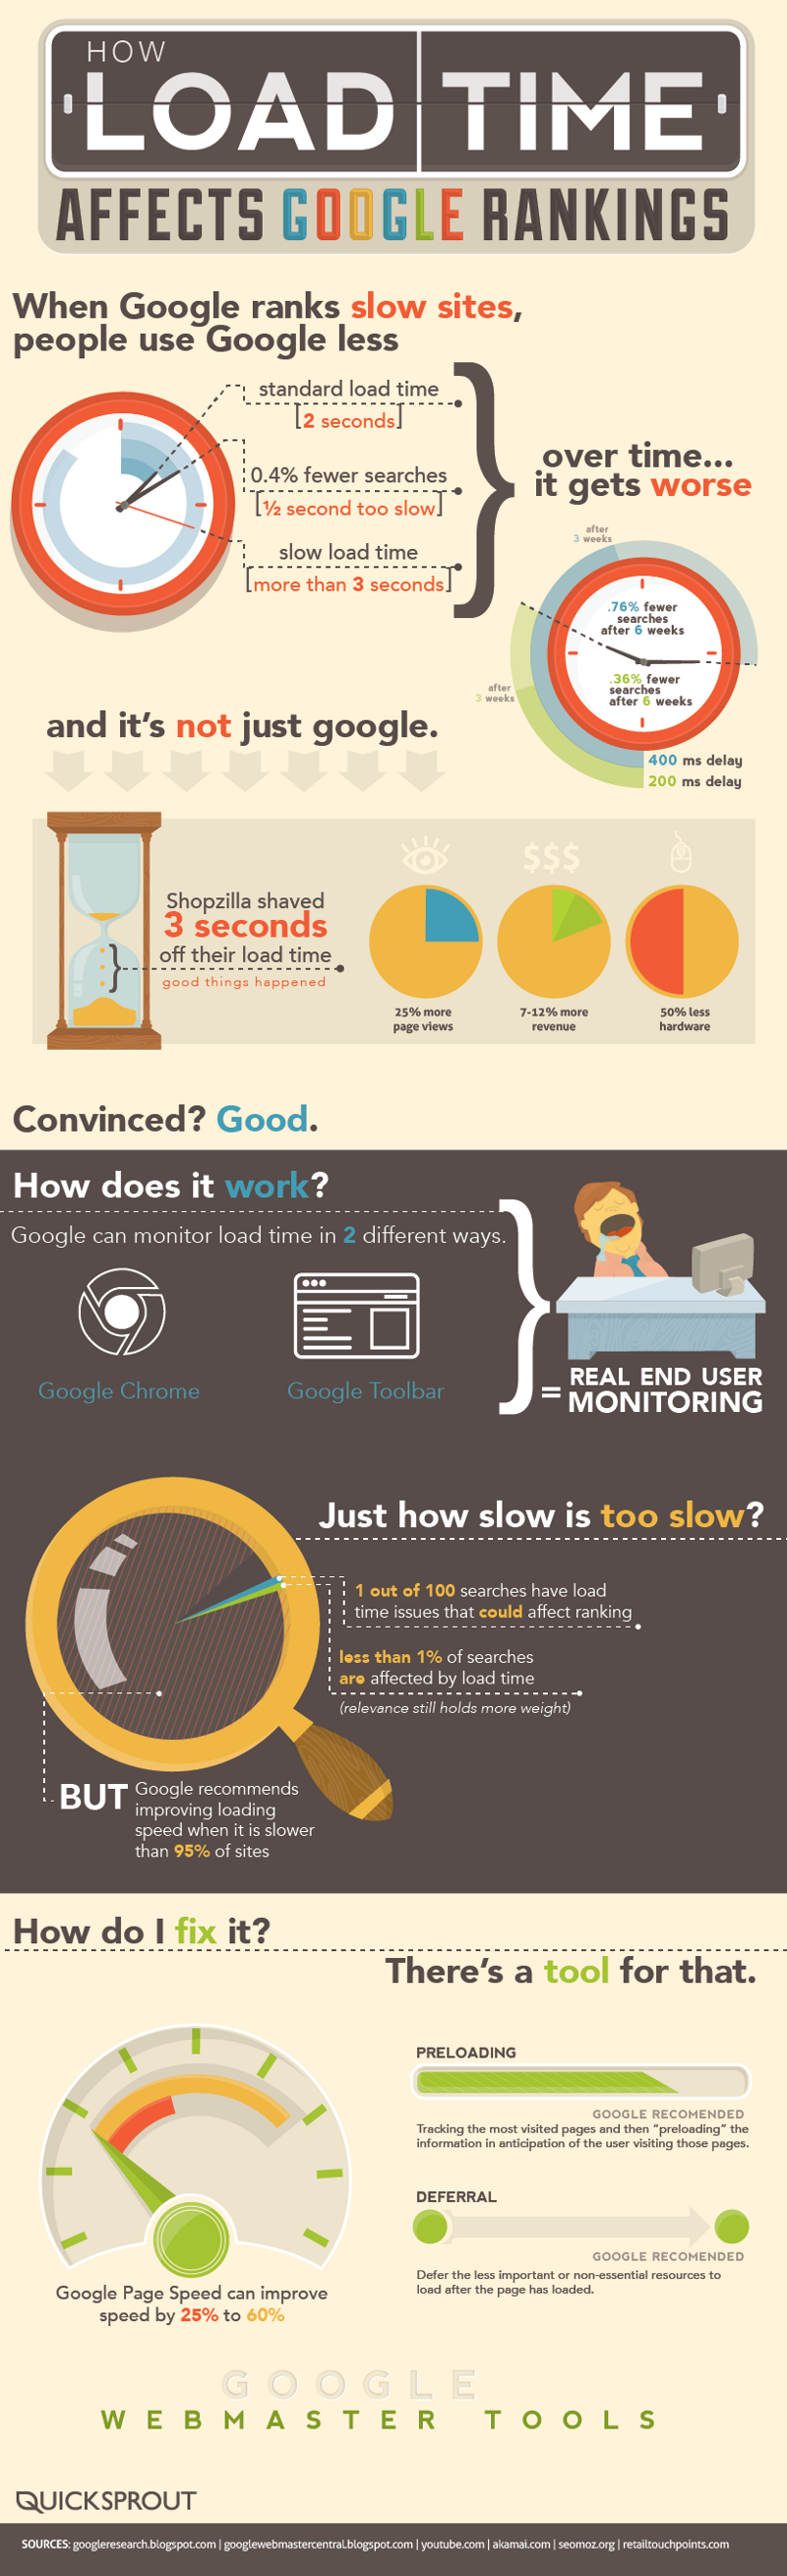 Load-Time-Impacts-Google-Rankings